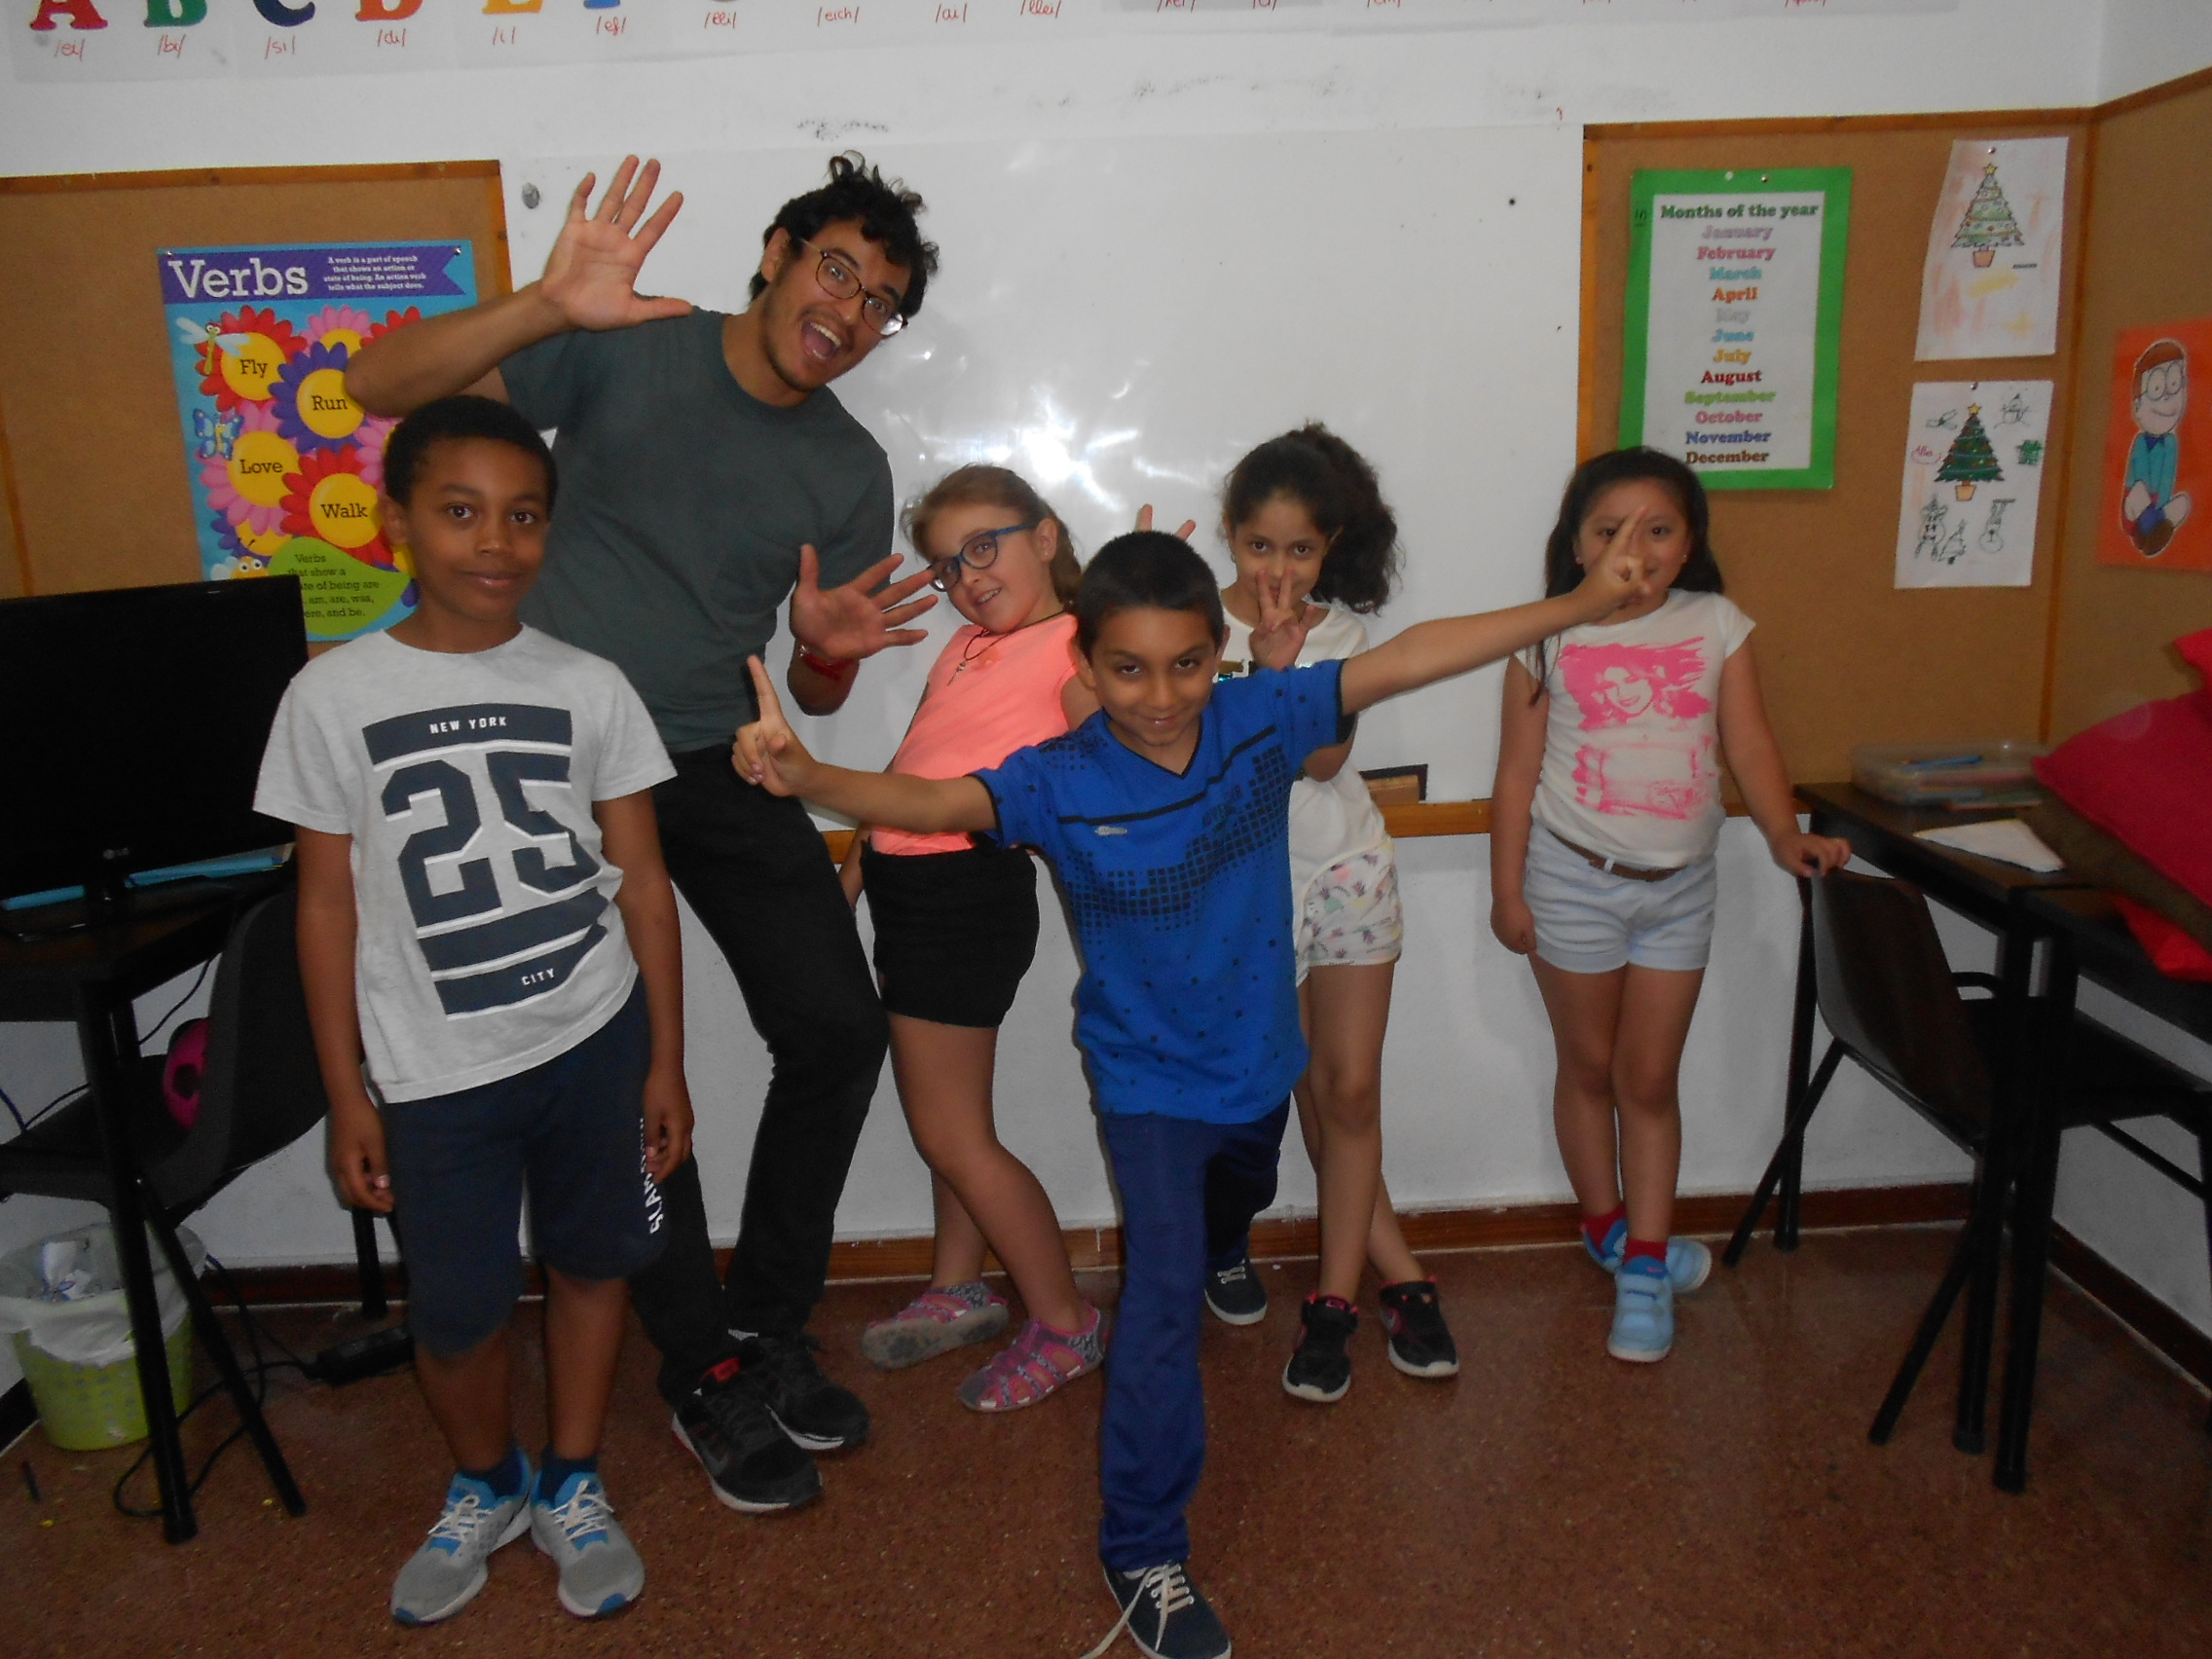 Students learning with dances